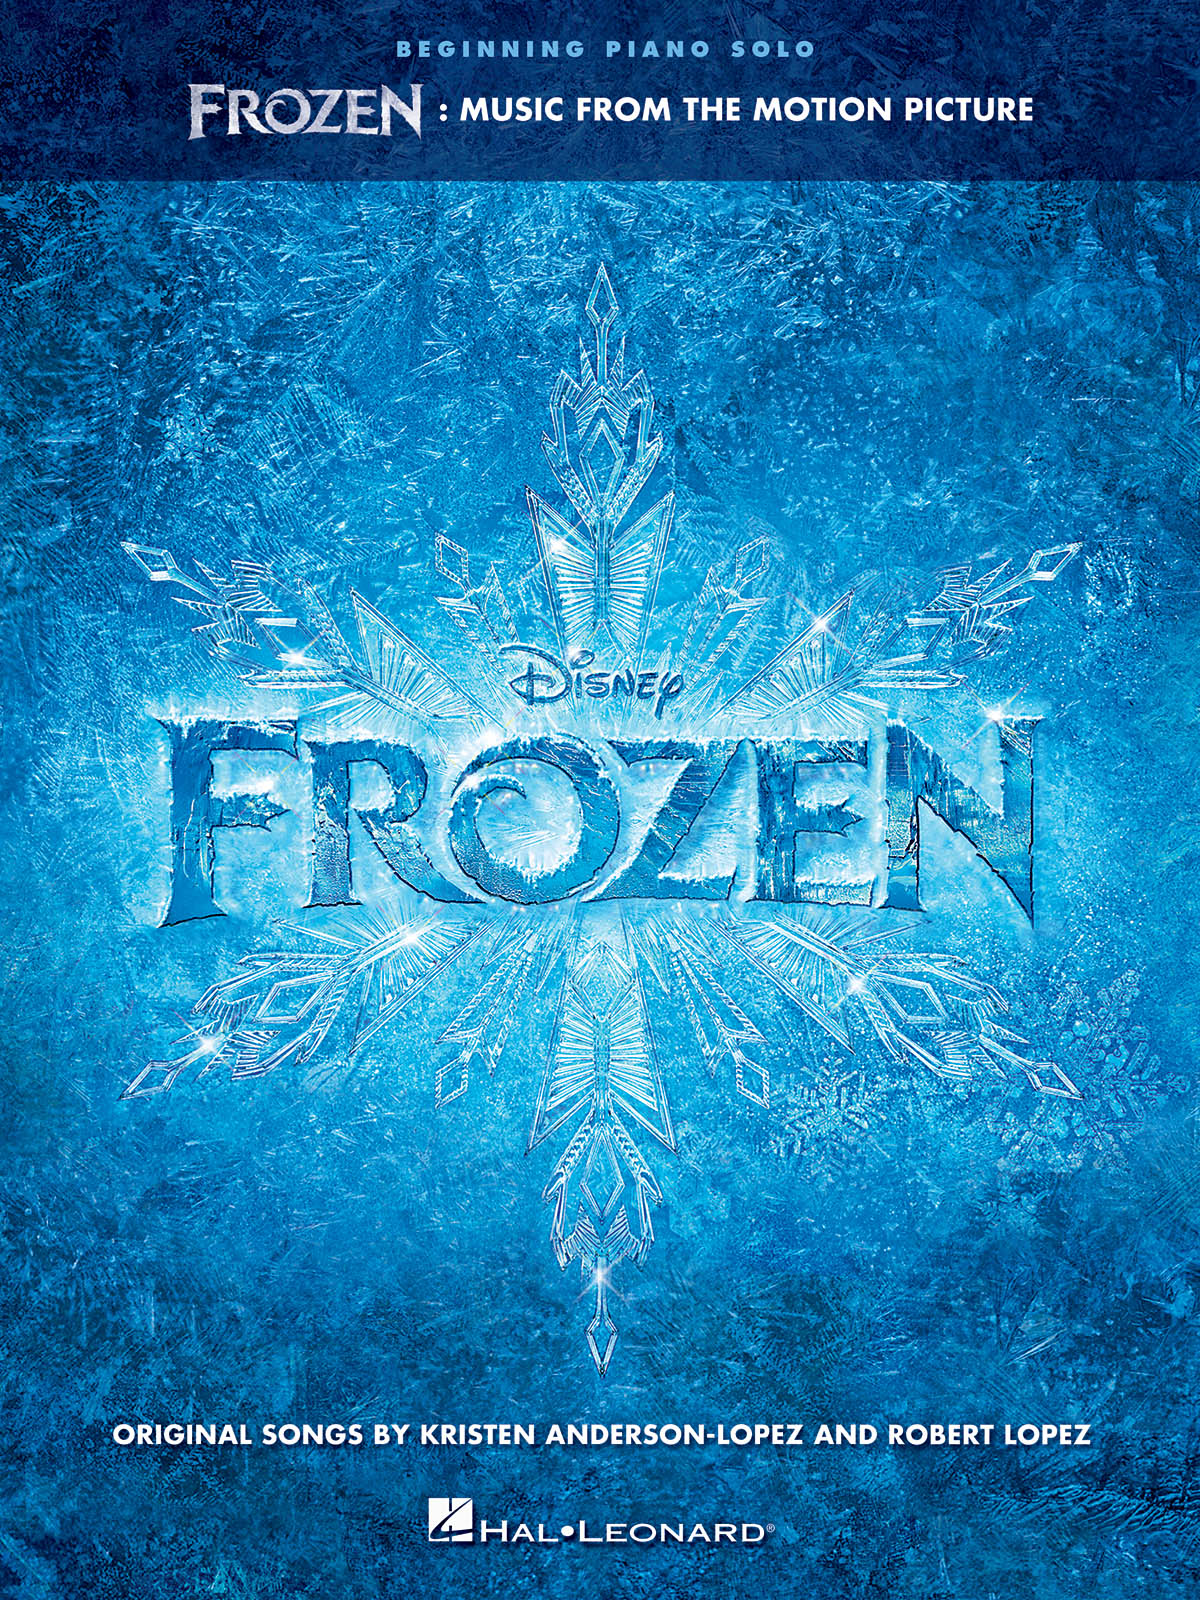 E-Z Play Today 212: Frozen - Music From The Motion Picture Soundtrack: E-Z Play Today Volume 212